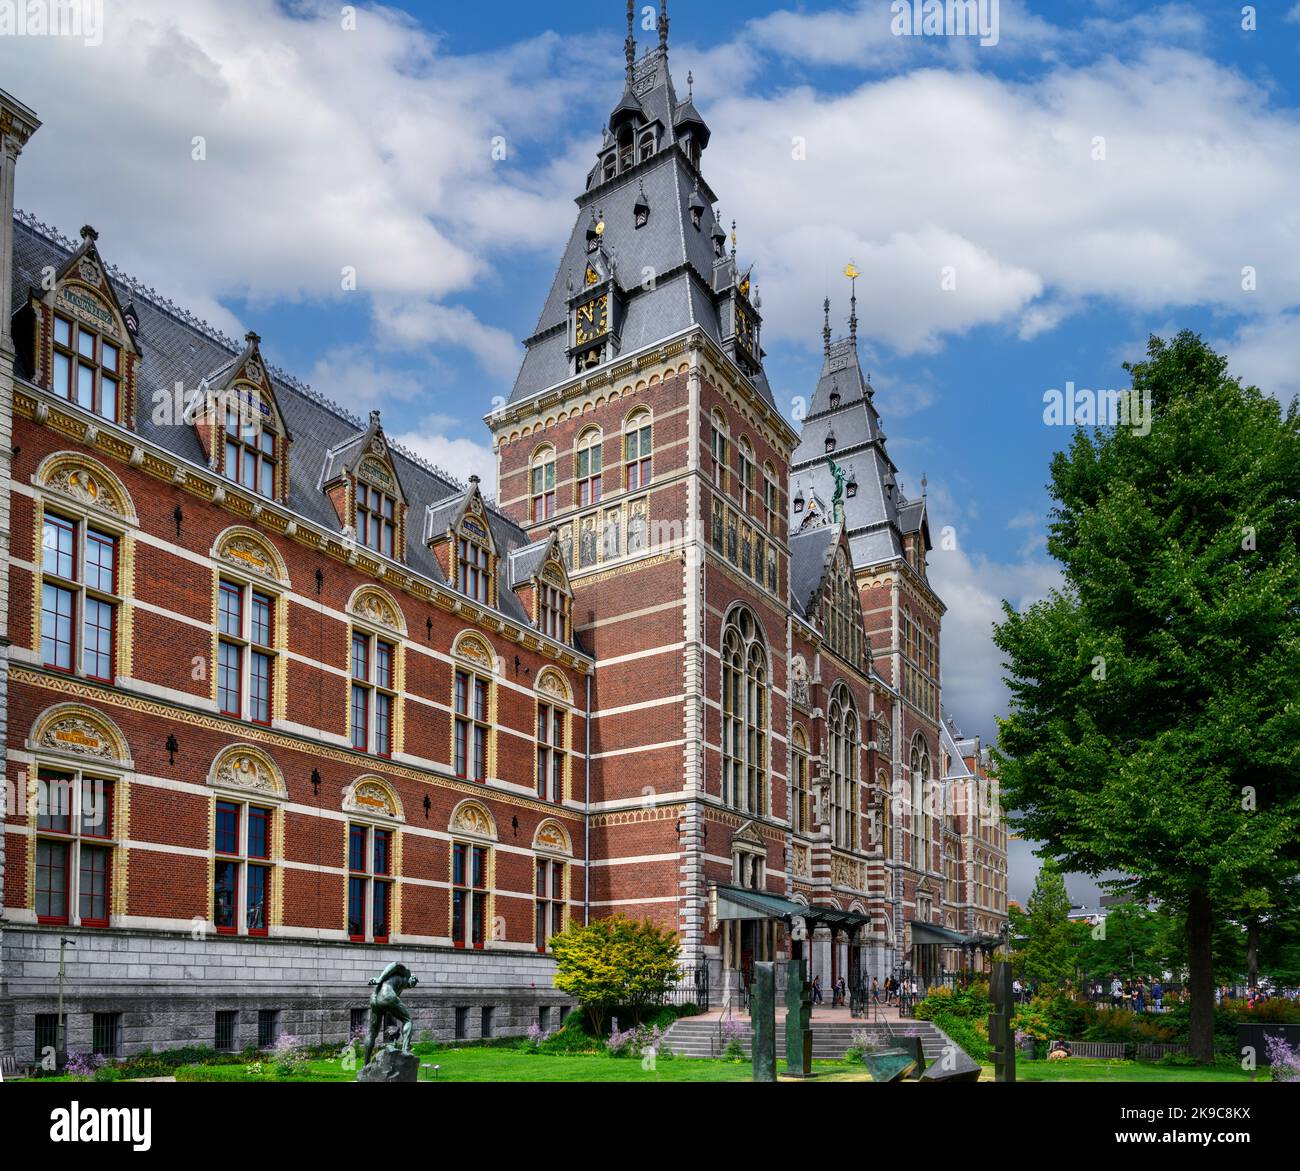 Le Rijksmuseum, Museumstraat, Amsterdam, pays-Bas Banque D'Images